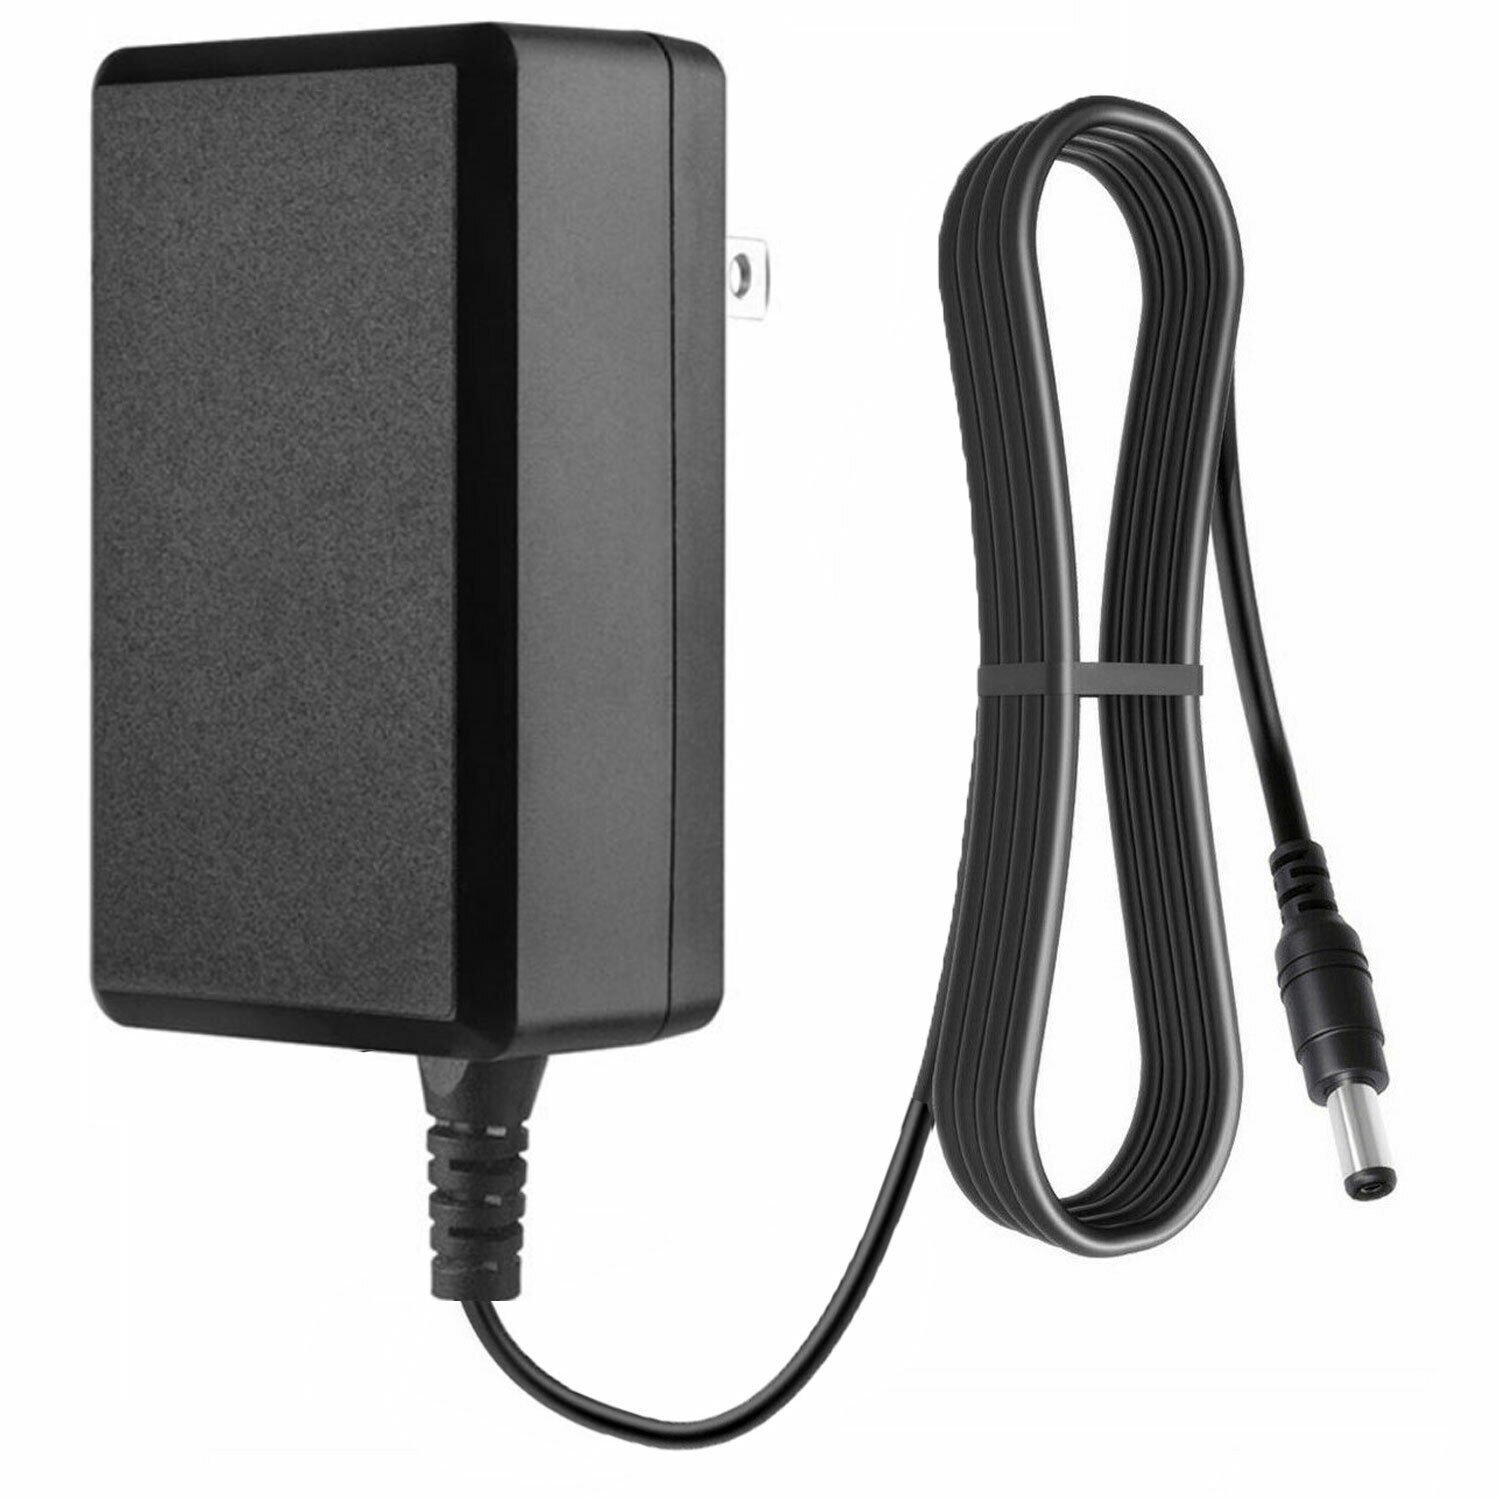 Universal 12V 500mA AC/DC Adapter Power Supply Charger BLC241200500MZ 5.5mm Type AC/DC Adapter Features Powered Co